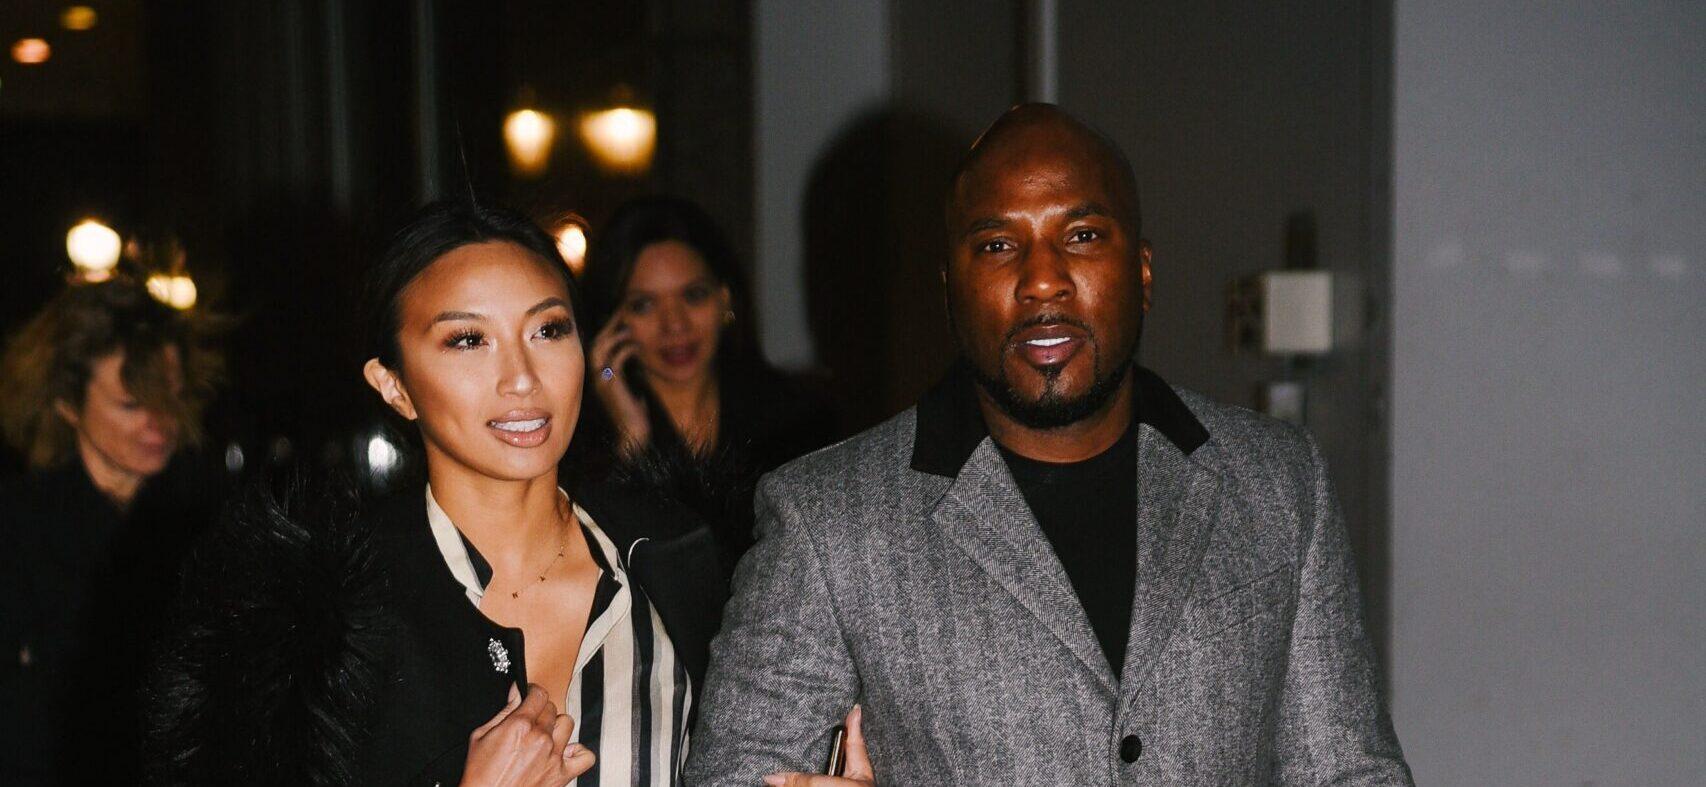 ‘The Real’ Host Jeannie Mai Accuses Rapper Jeezy Of Cheating In Divorce